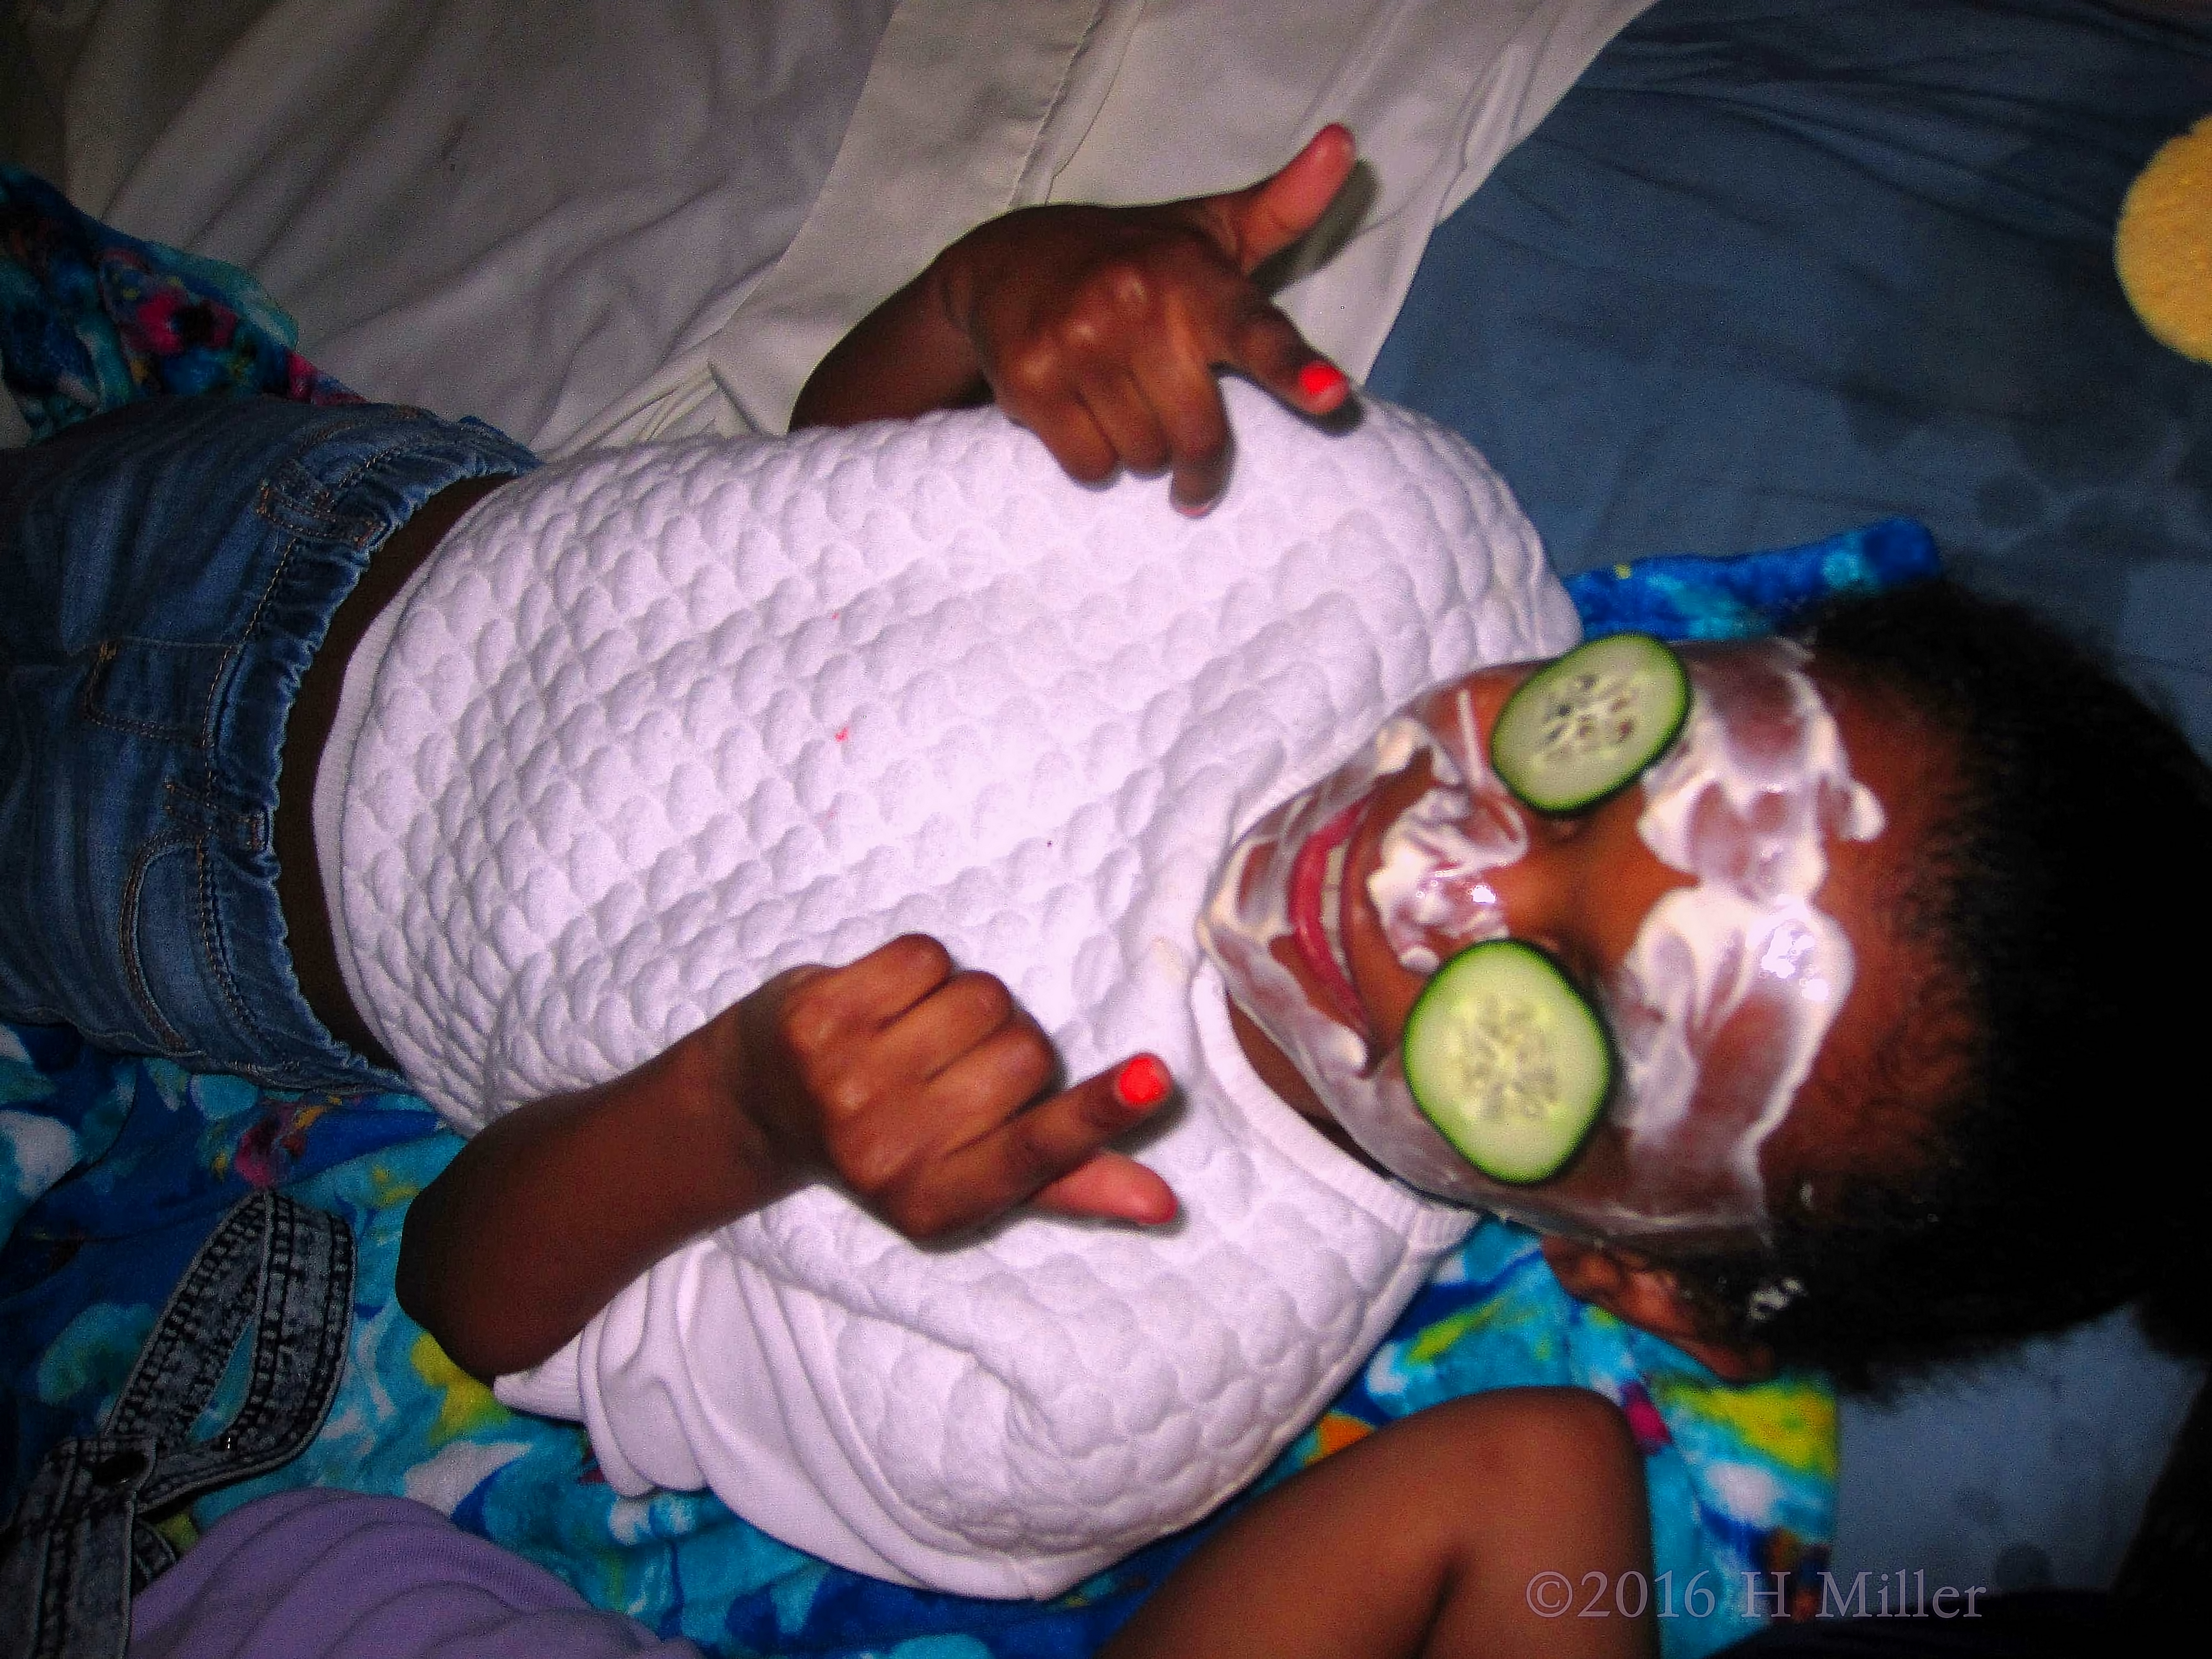 What A Cool View Of Kids Facials With Cukes And Face Masque. 